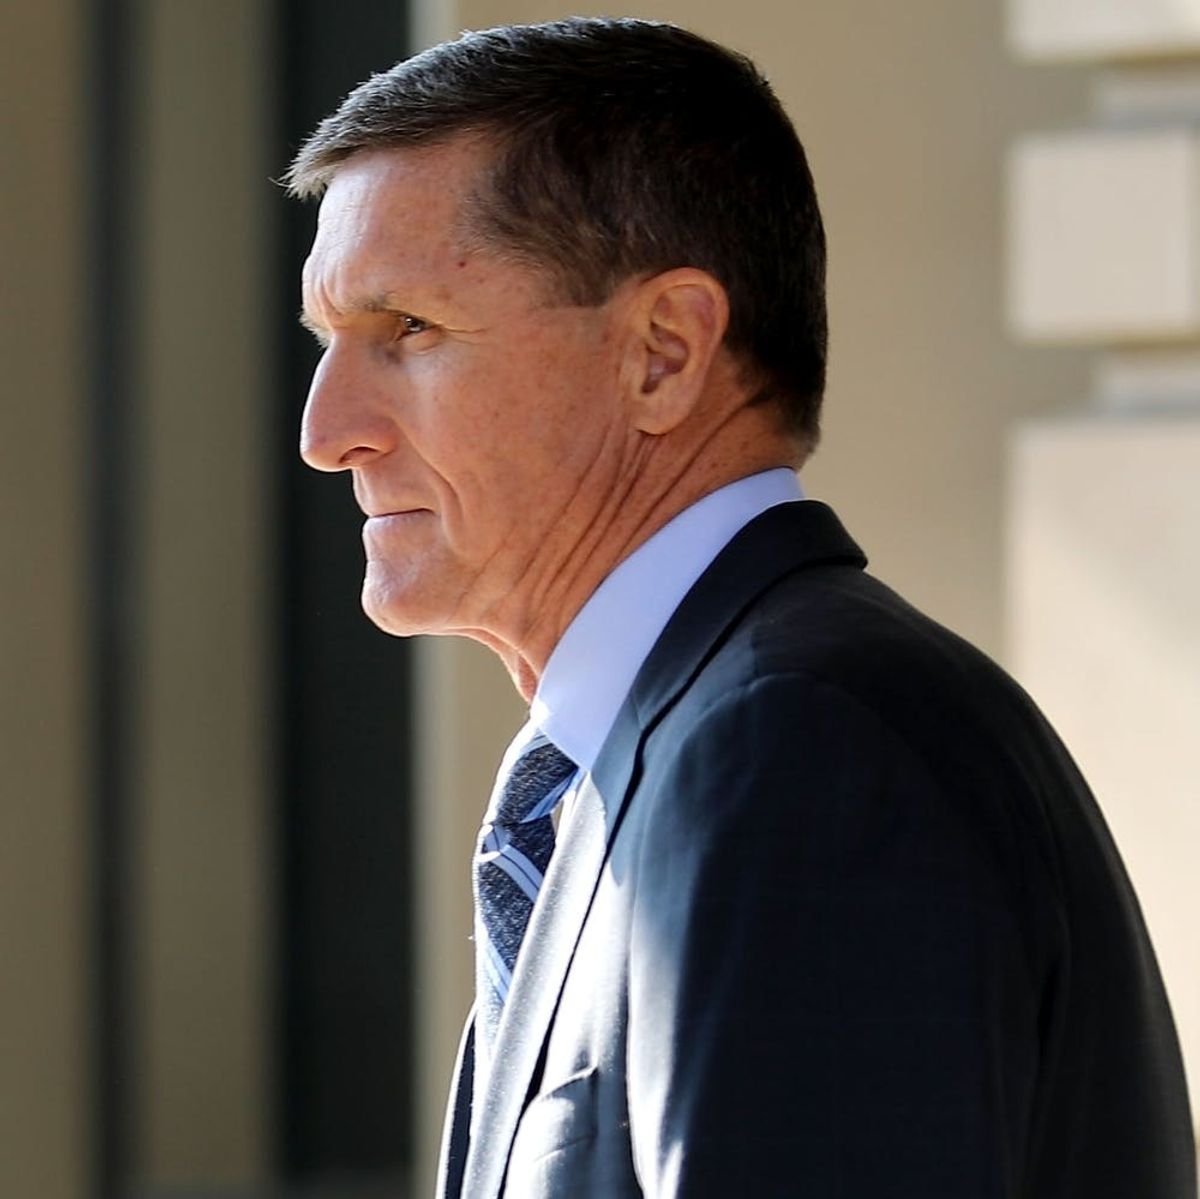 Former Presidential Advisor Michael Flynn Has Pled Guilty to Lying to the FBI About His Russia Connections